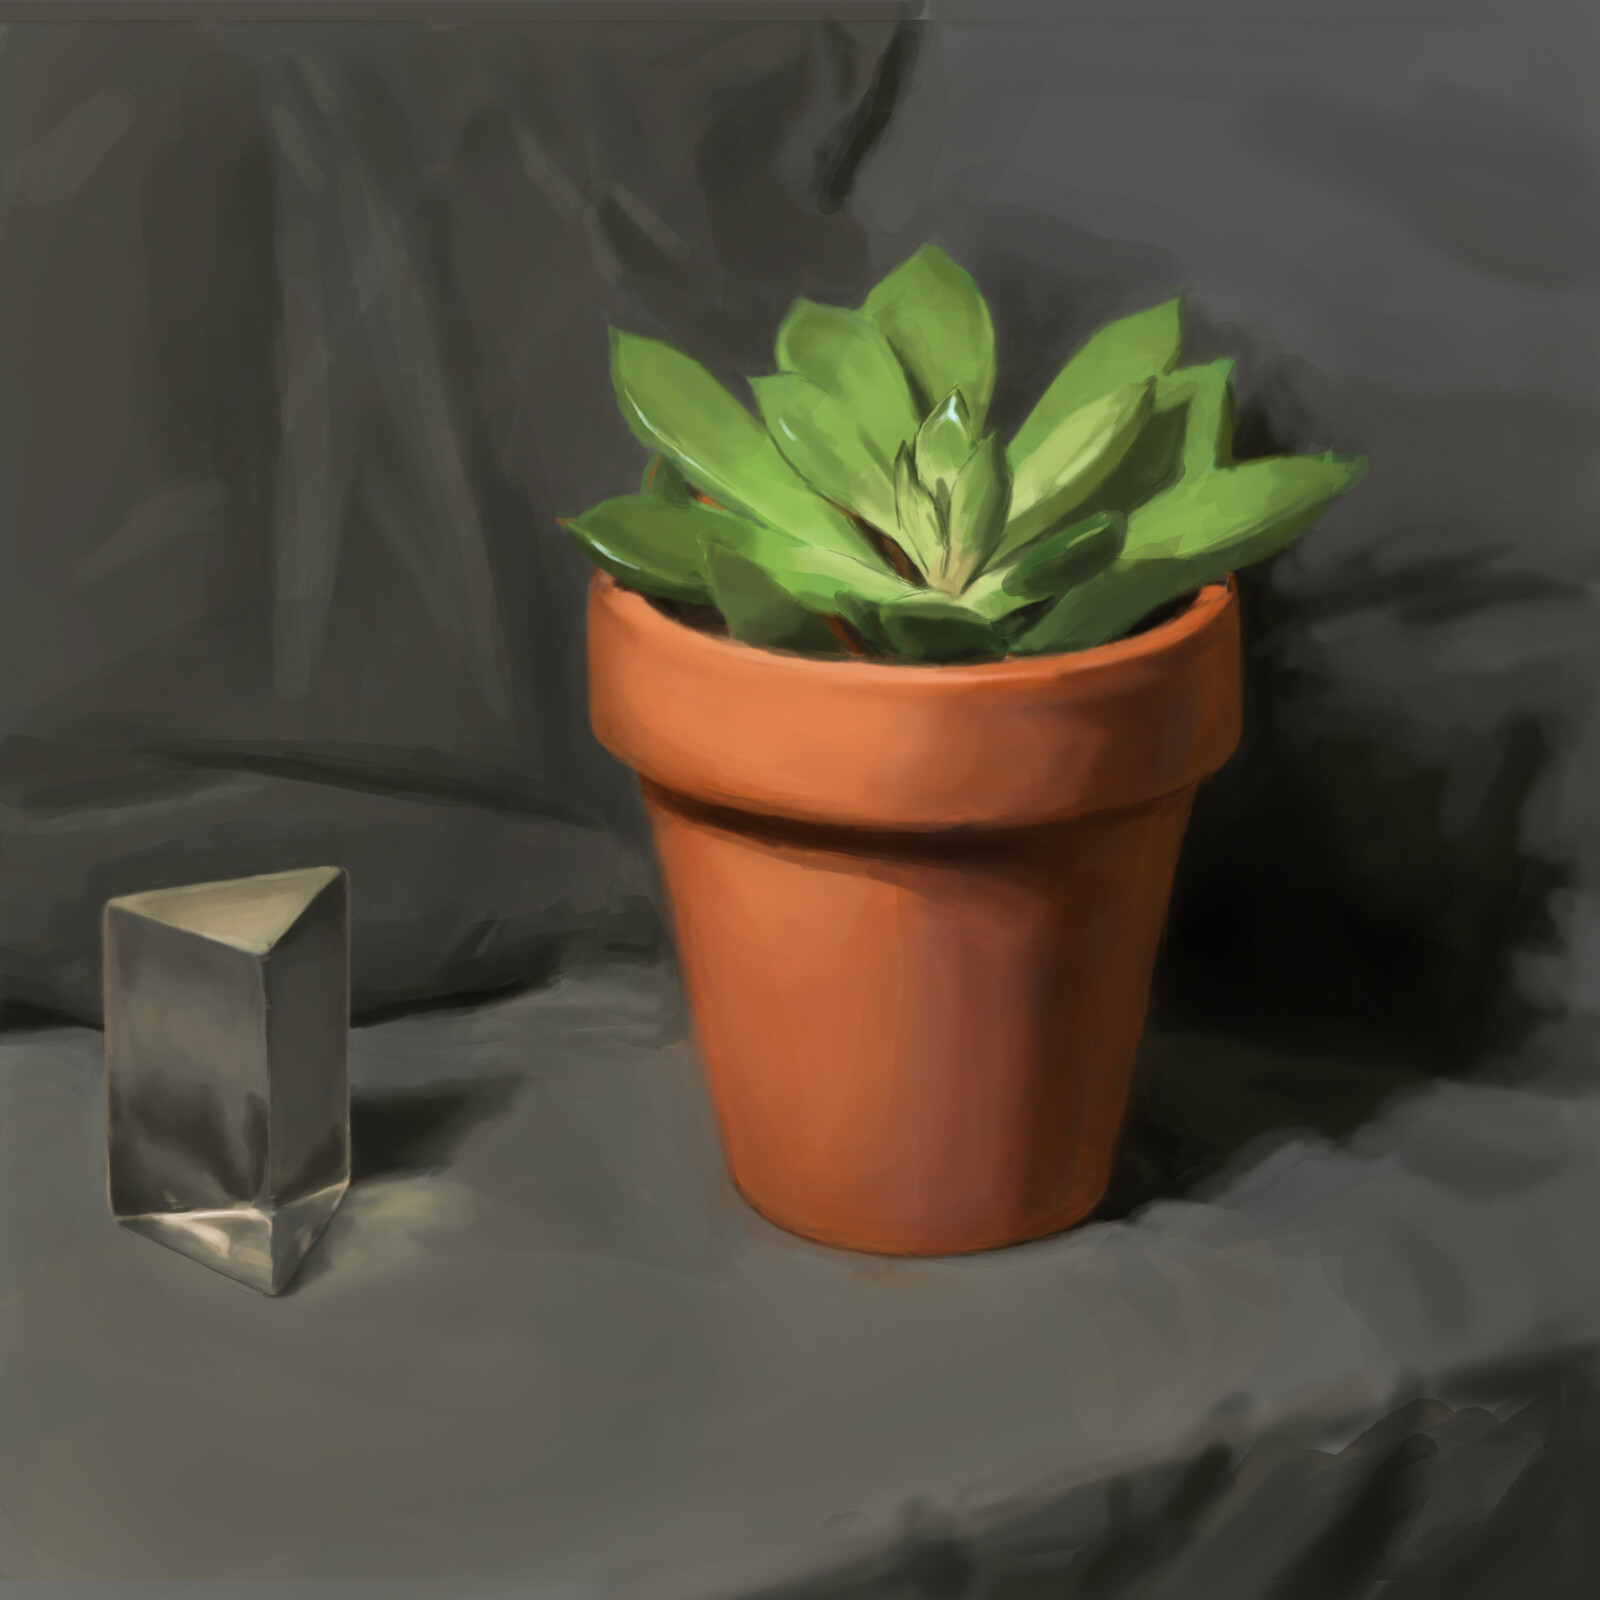 Still Life: Prism and Succulent